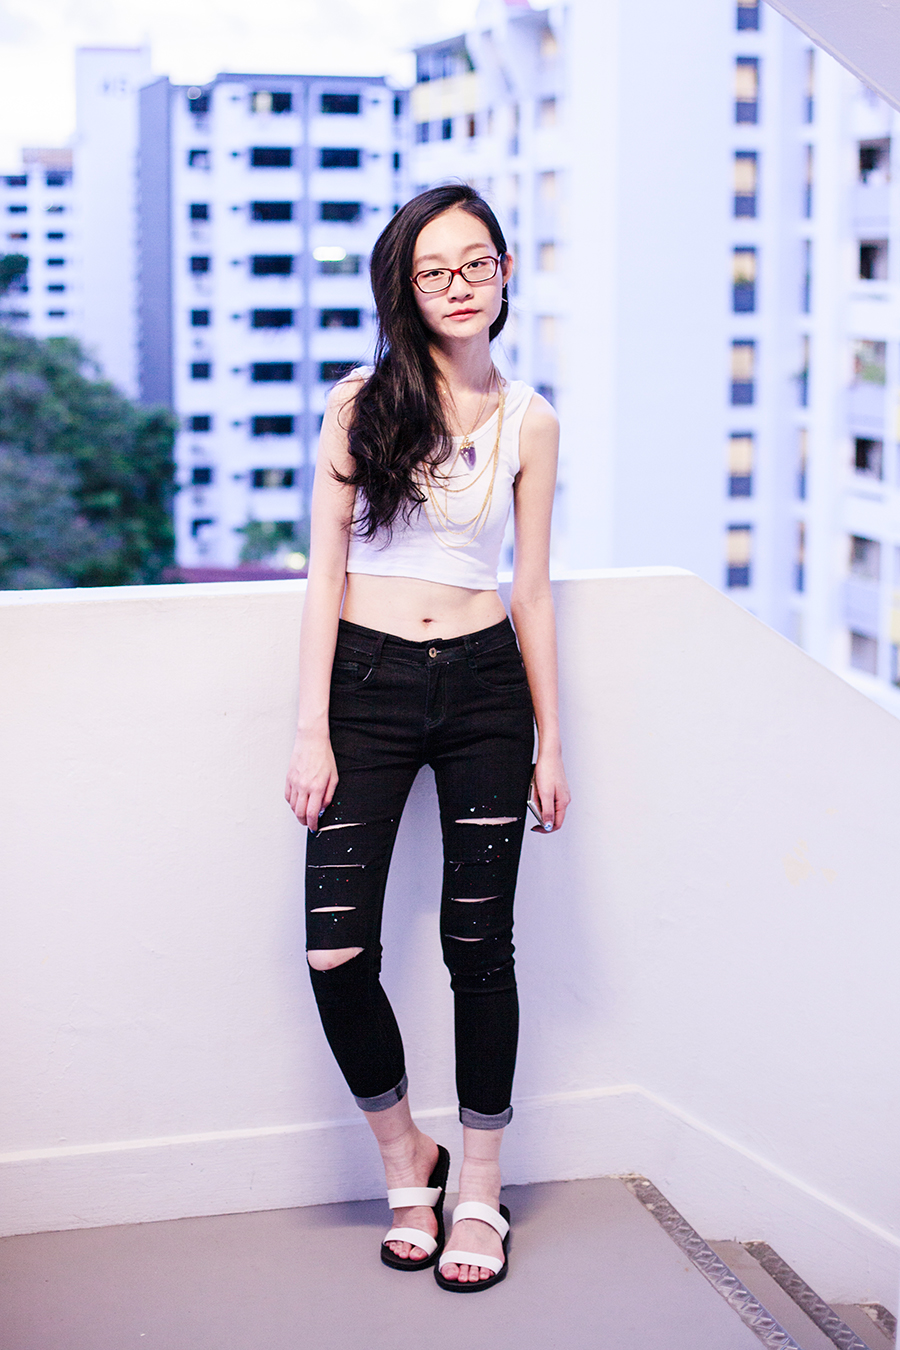 Monochromatic casual outfit: Boylymia ripped jeans, WholesaleBuying white tank crop top, Dealsale amethyst necklace, Firmoo red framed glasses, BlackOutSG white sandals.